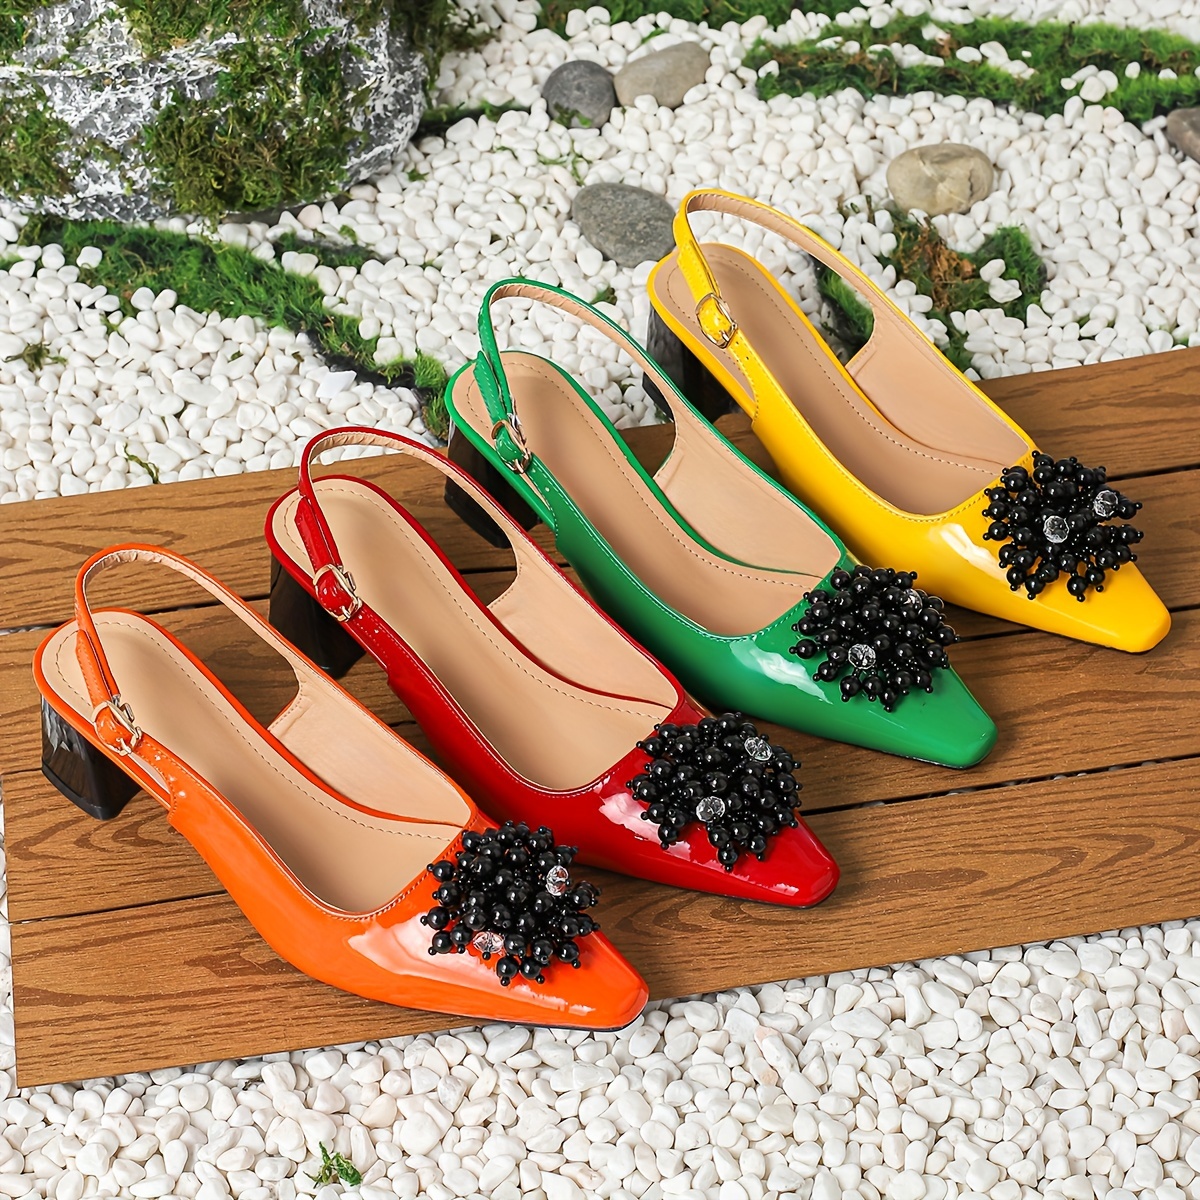 

Women's Fashion Slingback Heels, Stylish Embellished Pointed-toe Pumps With Chunky Heel, Colorful Selection For Party And Casual Wear